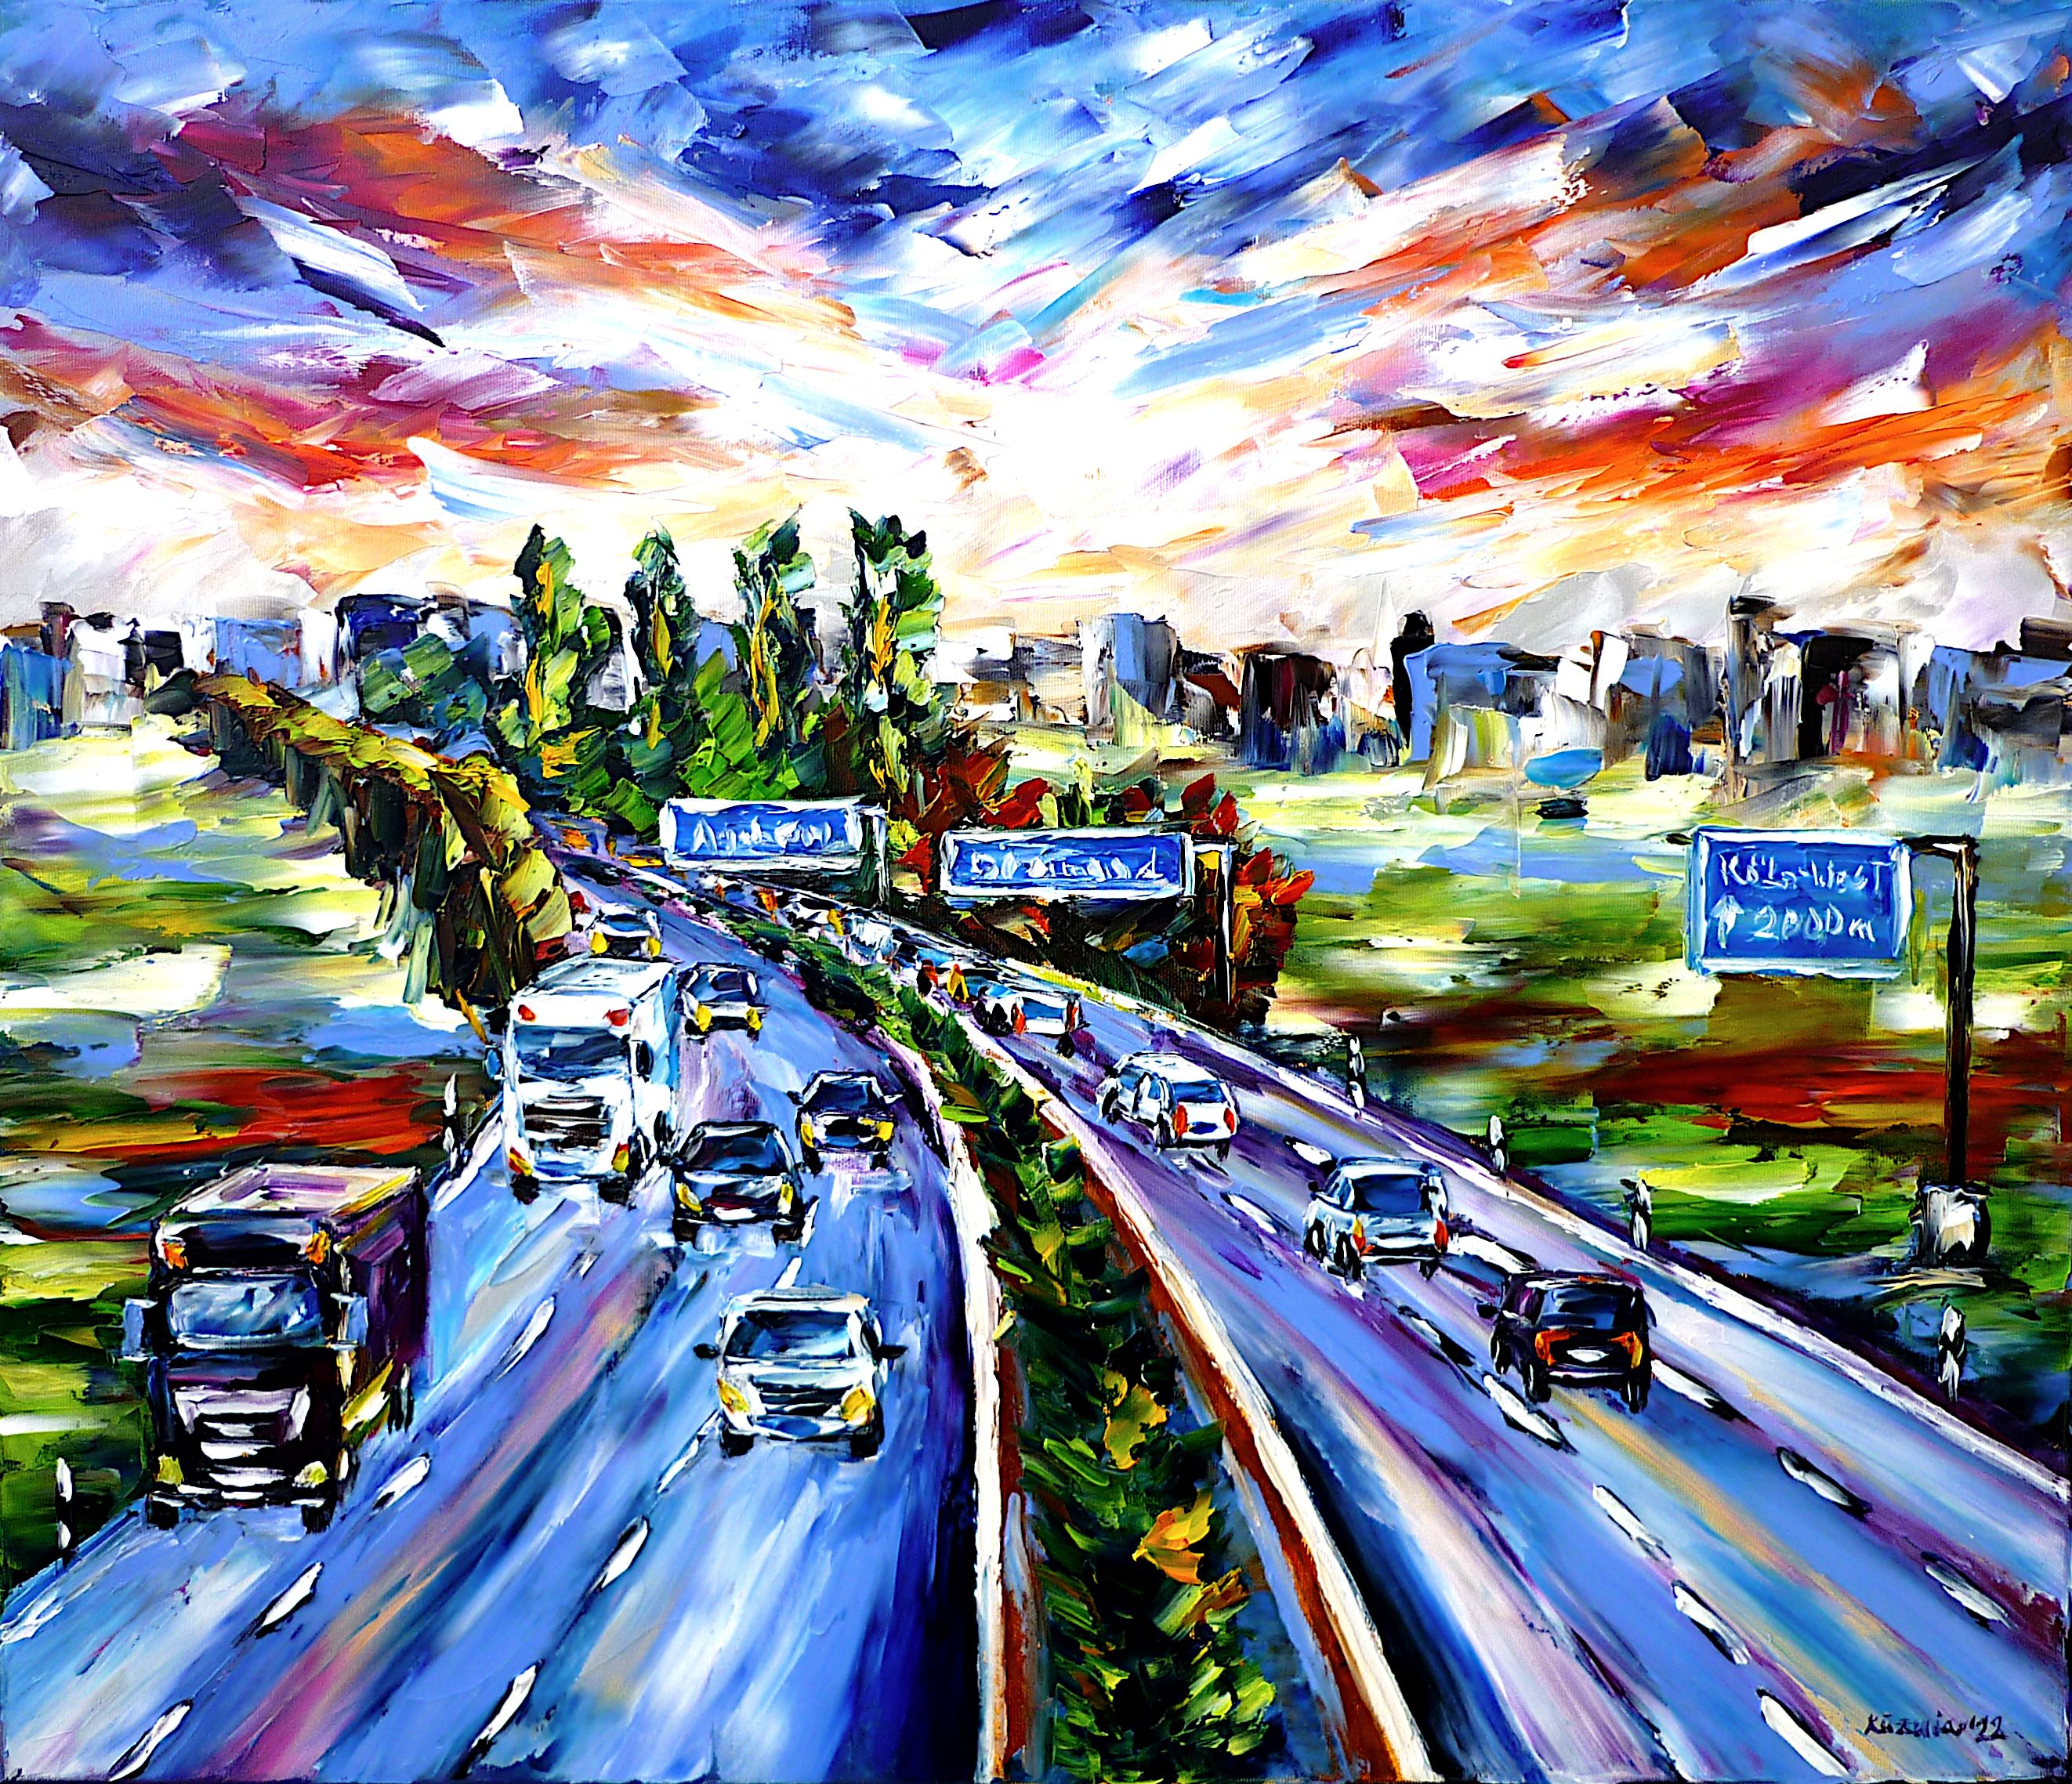 on the highway,highway scene,on the freeway,freeway scene,sky over city,cars,trucks,car traffic,freeway cologne,abstract sky,city in the distance,freeway painting,highway painting,freeway picture,freeway signs,roadway,freeway life,overtaking cars,highway traffic jam,highway in the evening light,highway at sunset,road traffic,autobahn in germany,highway speedster,highway love,highway lovers,car love,car lovers,driving love,speed,city in the fog,foggy,foggy day,palette knife oil painting,modern art,impressionism,expressionism,abstract painting,lively colors,colorful painting,bright colors,light reflections,impasto painting,figurative